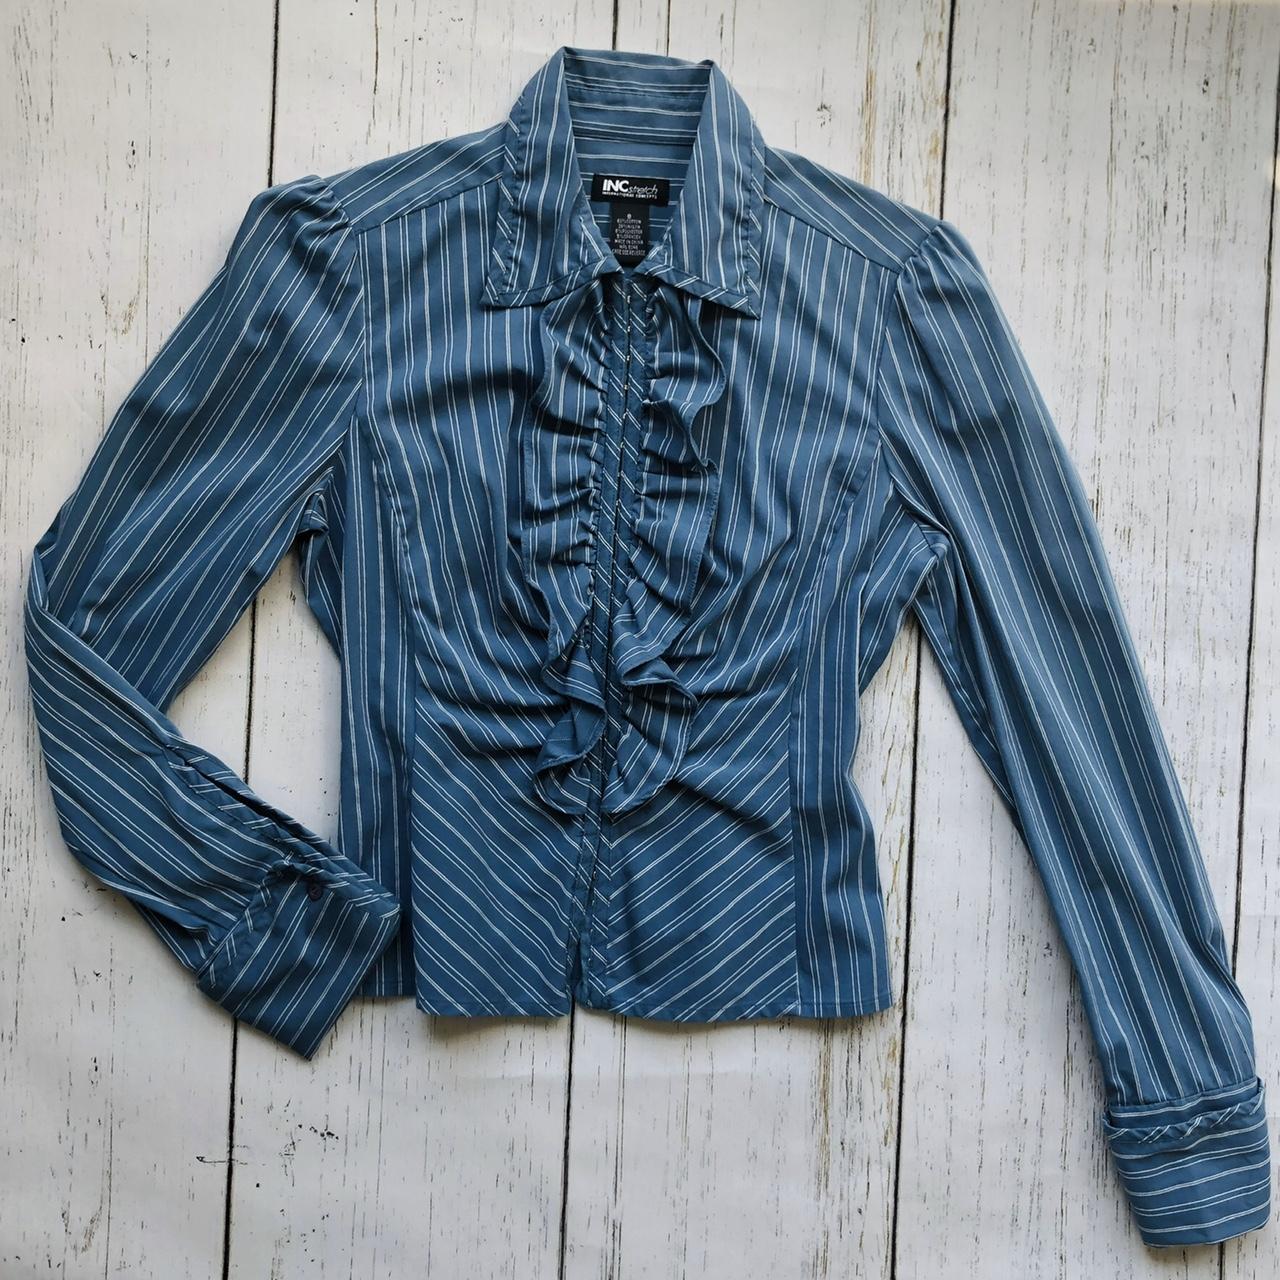 American Vintage Women's Blue and White Blouse | Depop